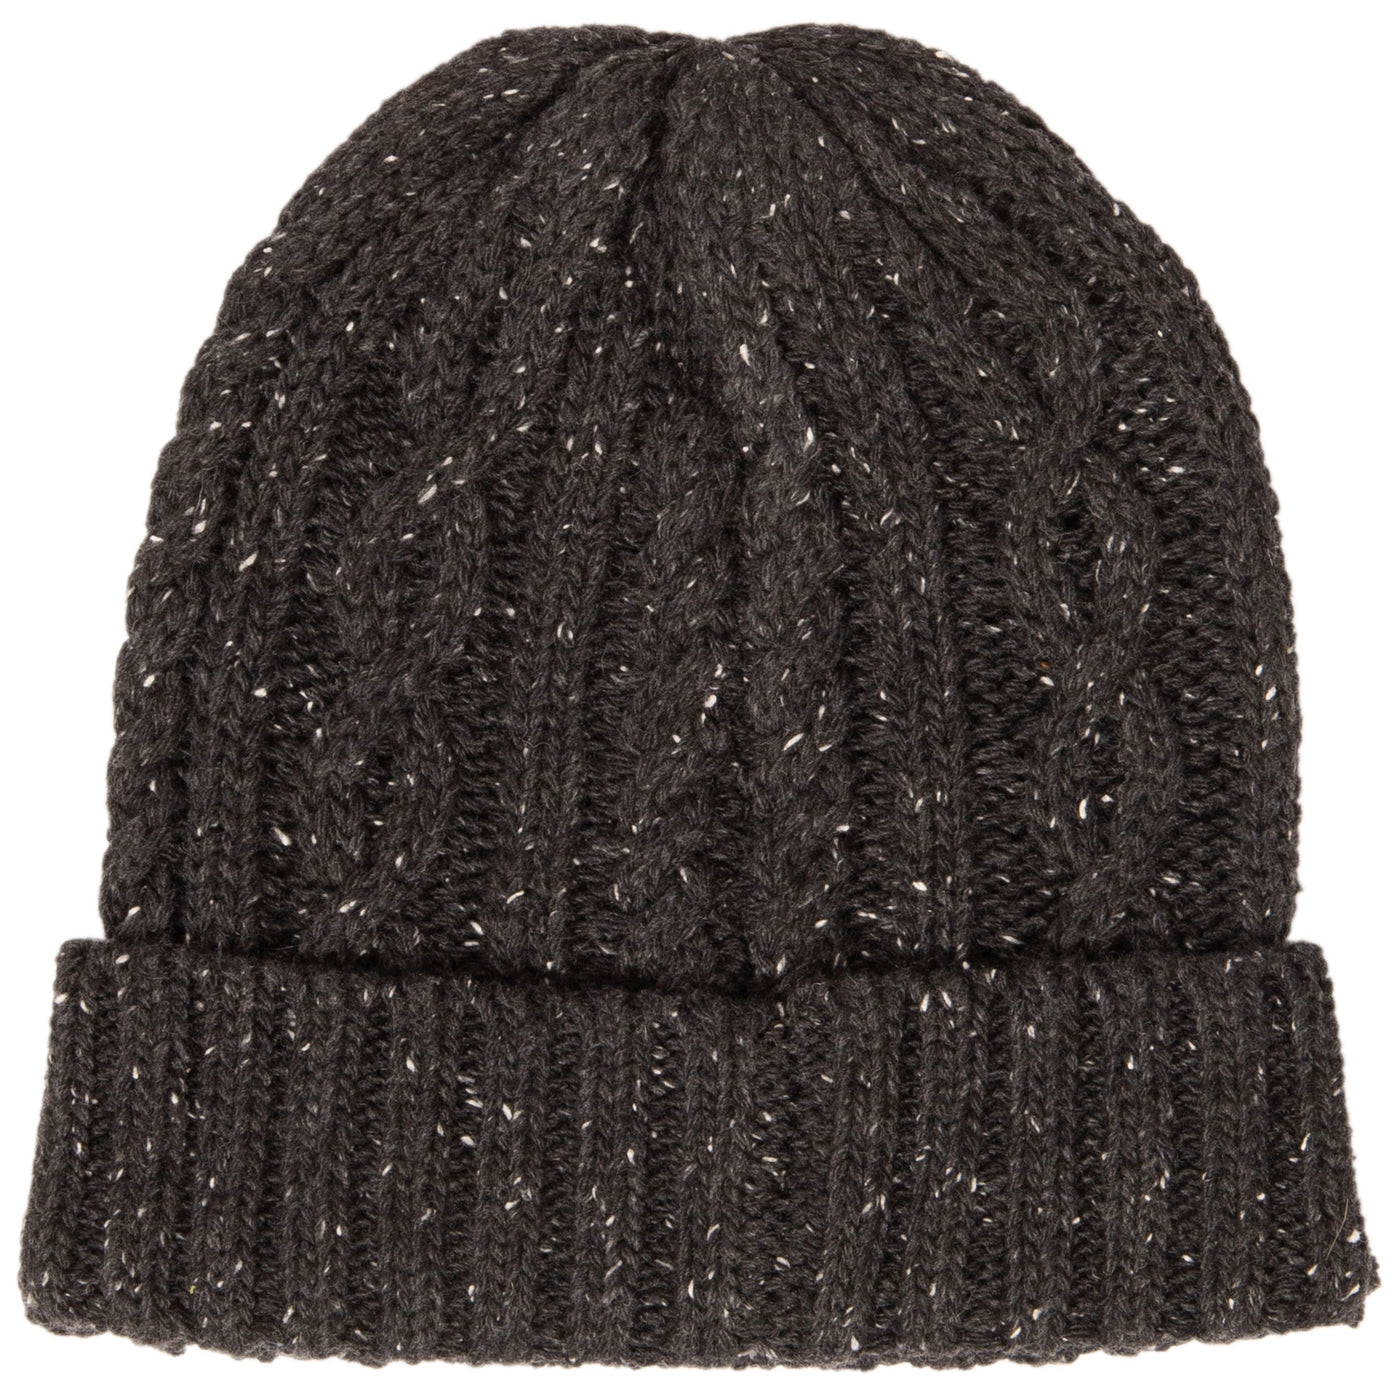 Men\'s Wool Blend Cable Knit Diego Beanie – Company San Hat Cuffed